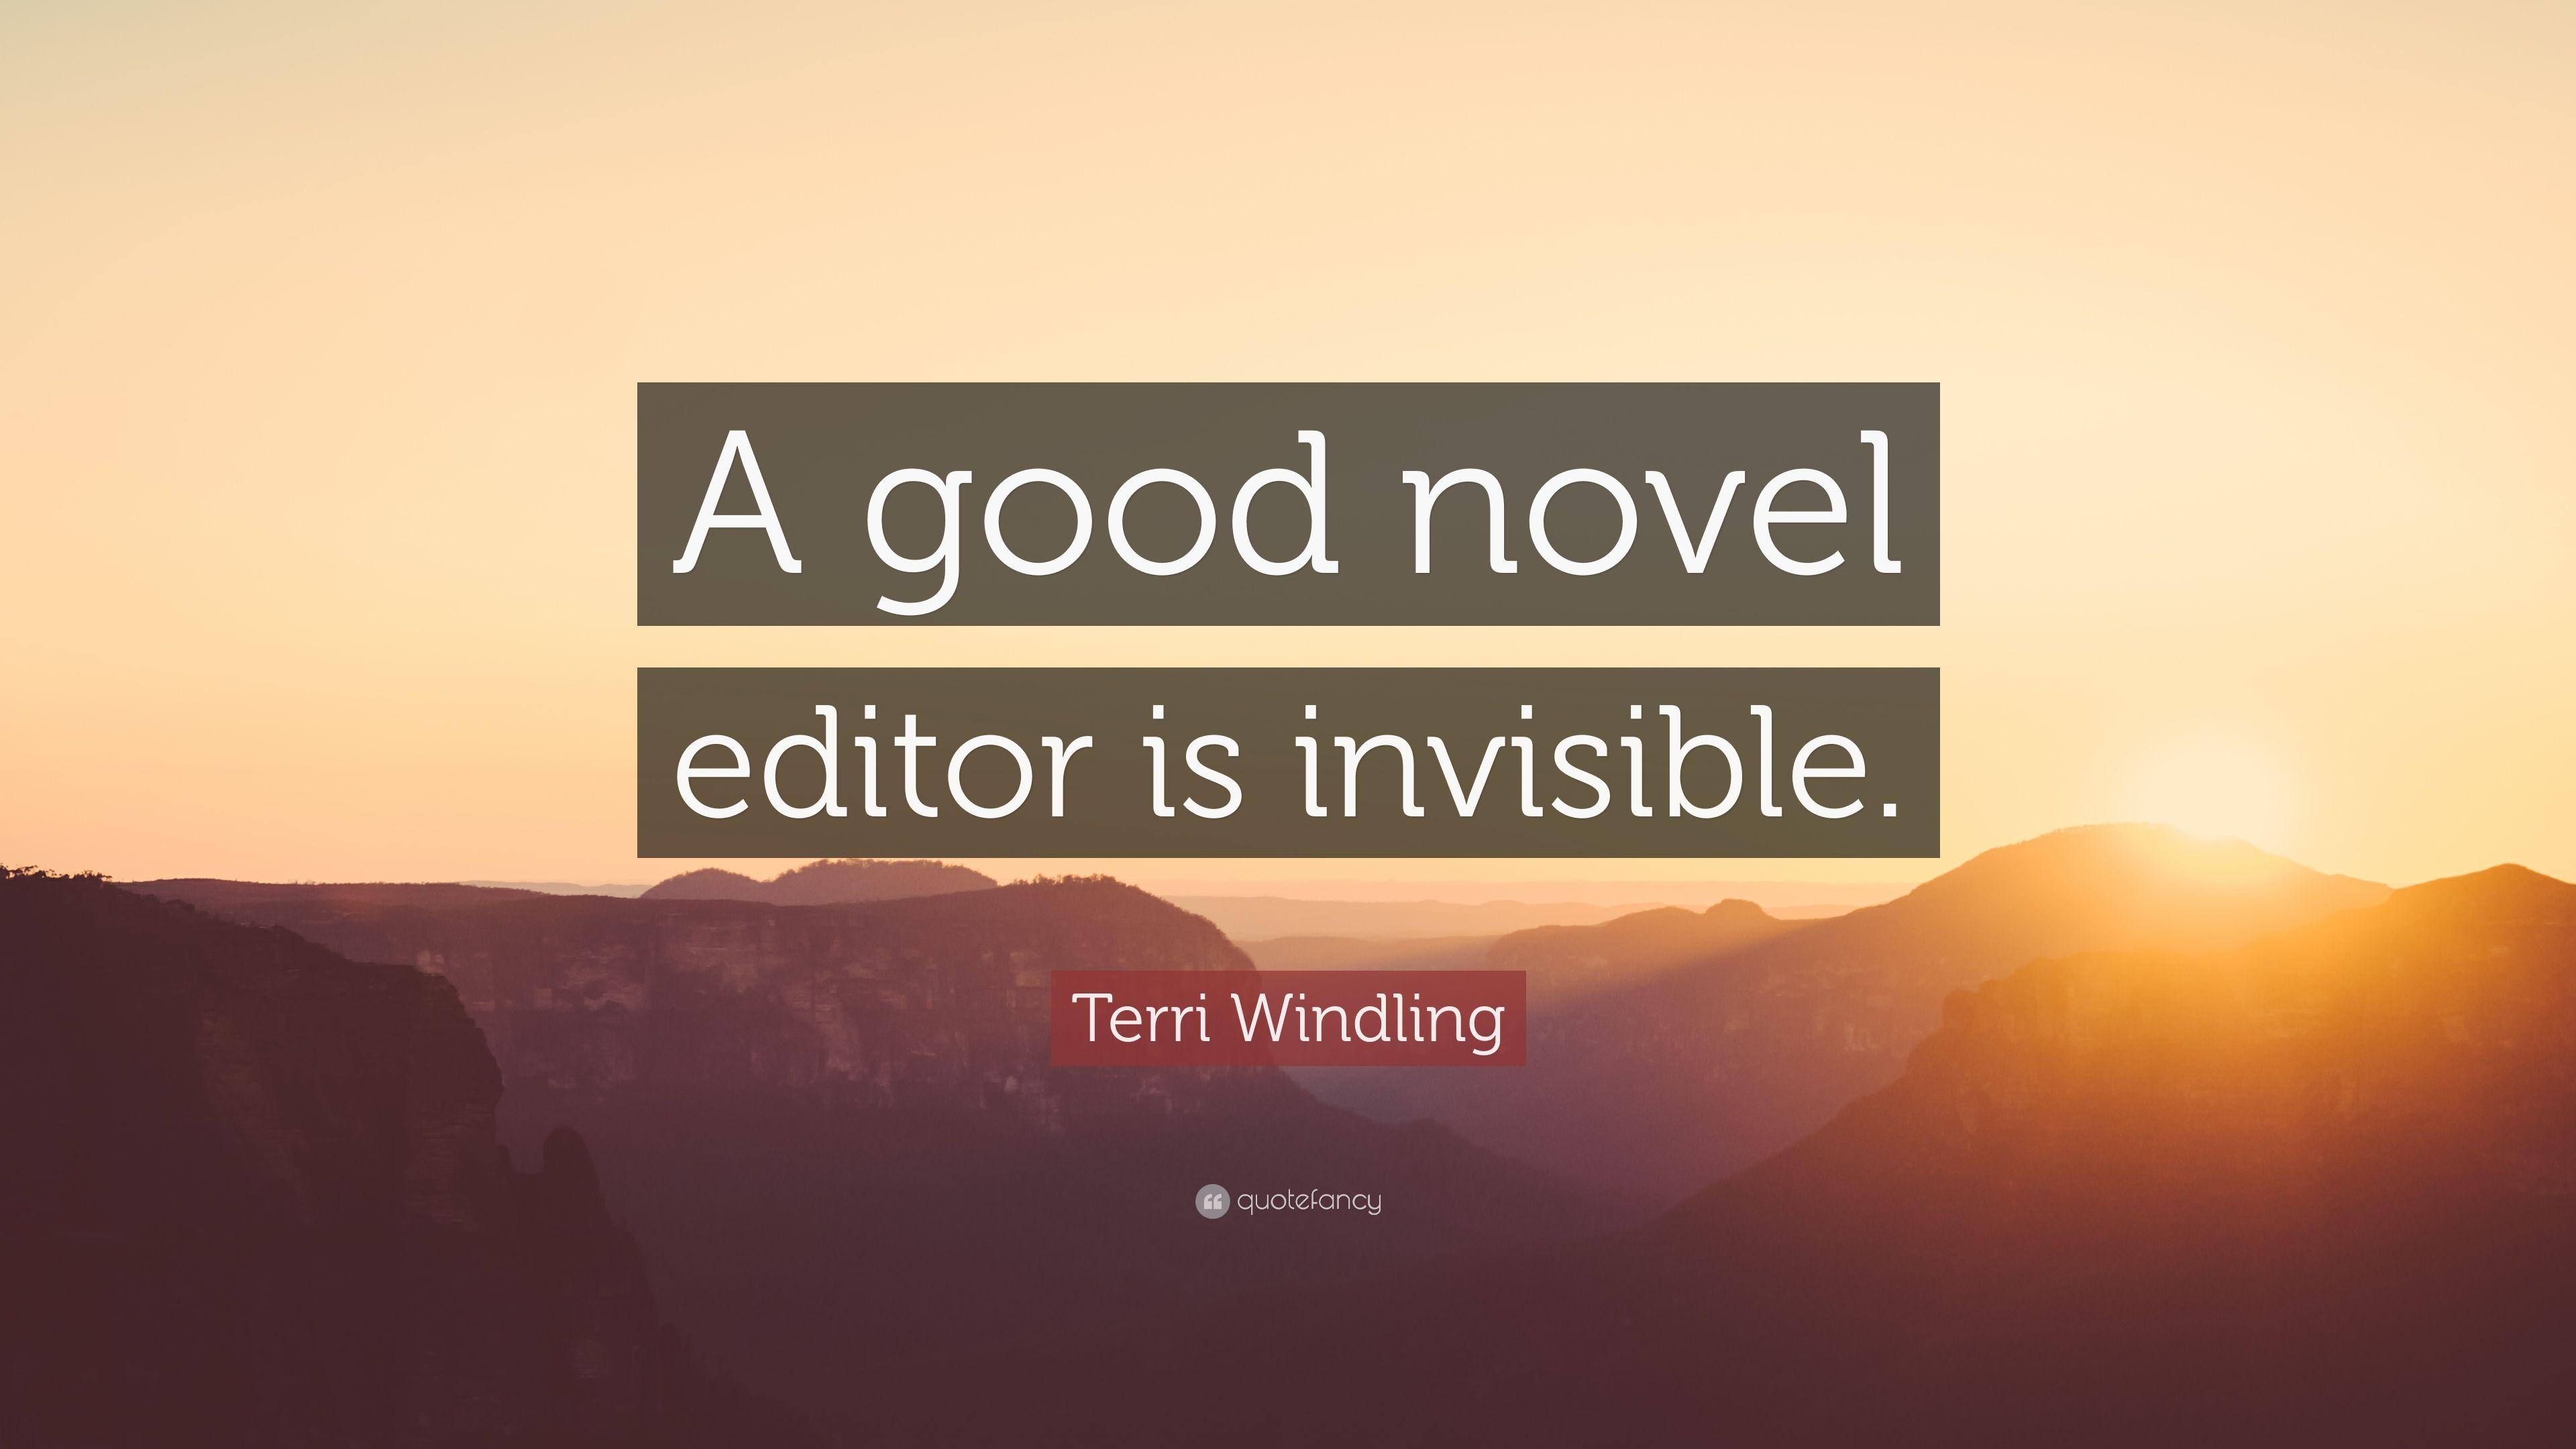 Terri Windling Quote: “A good novel editor is invisible.” 7